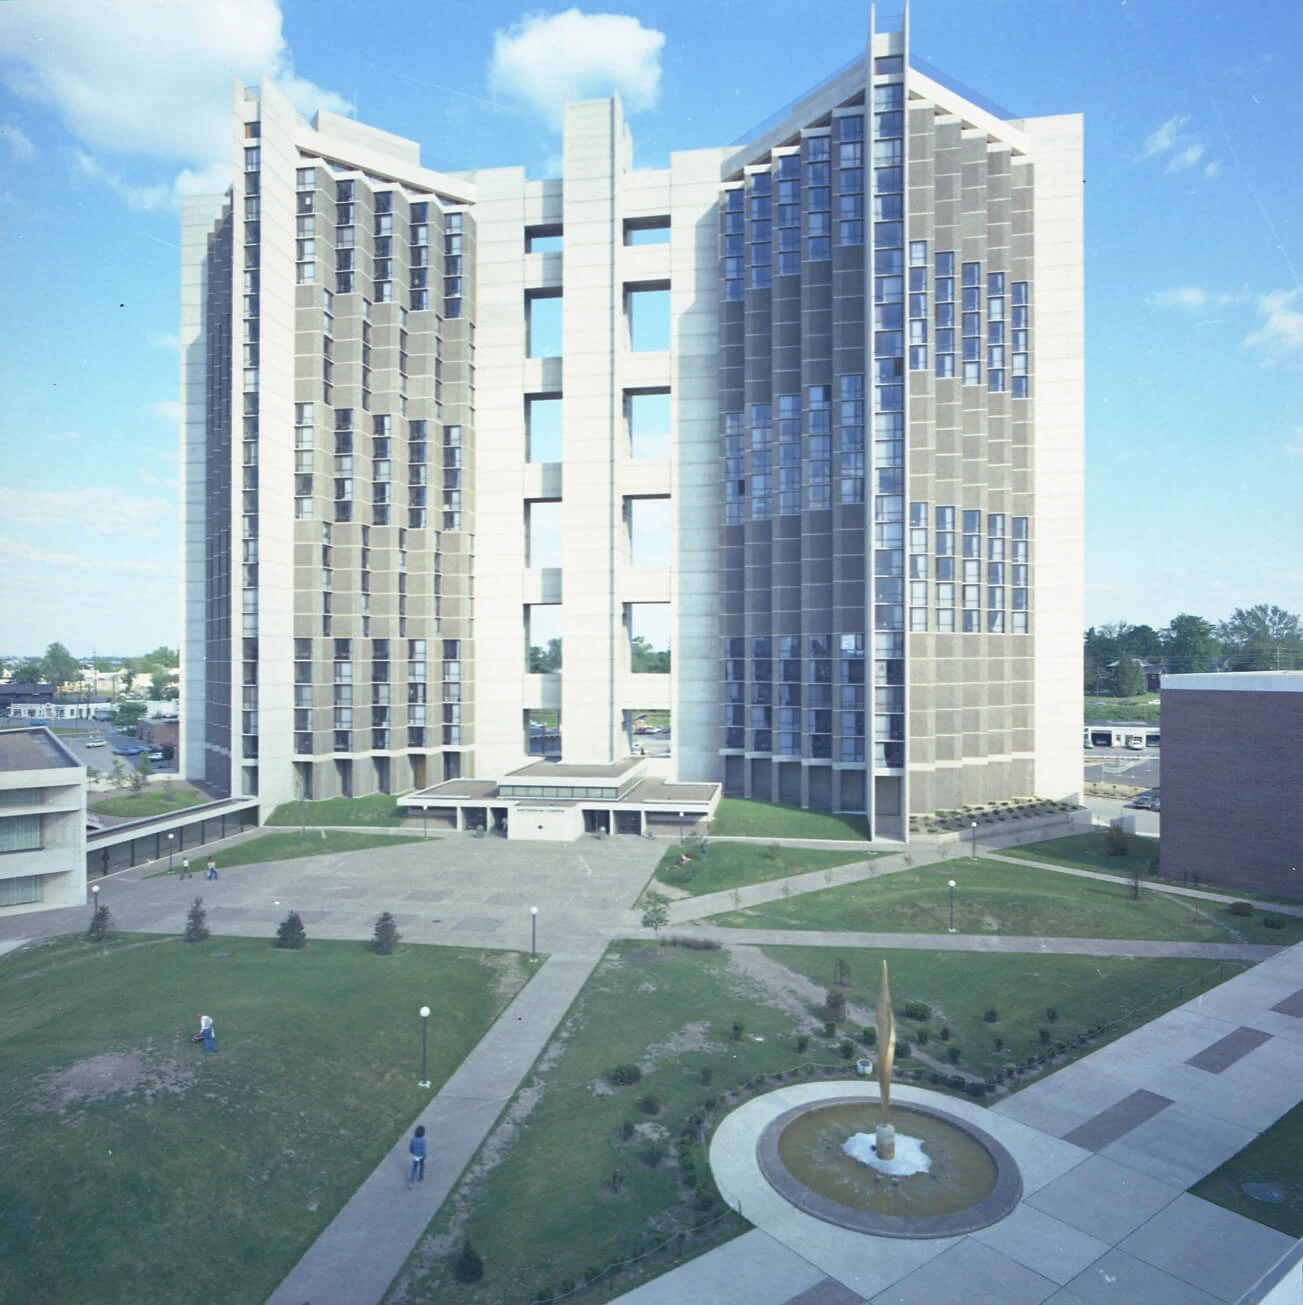 Color photograph of the 40+ story brutalist style student housing building and the green space in front of it.